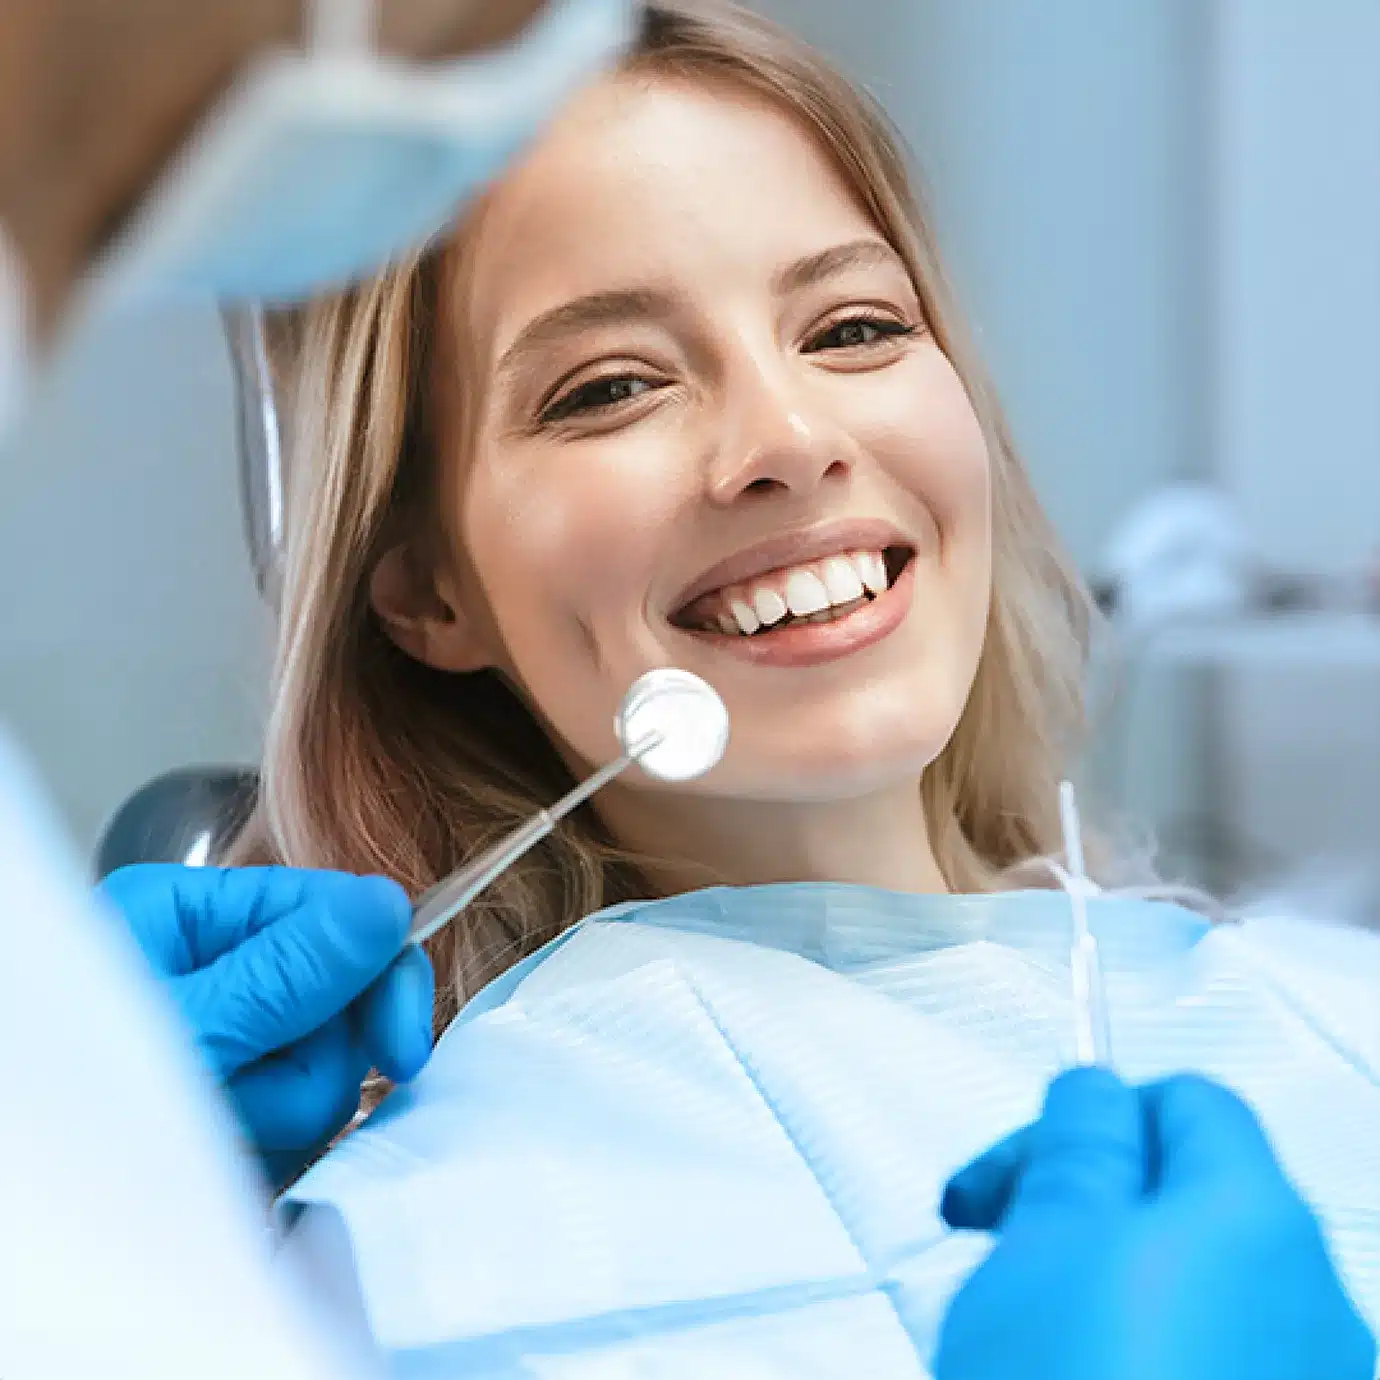 What to expect during and after a tooth extraction?